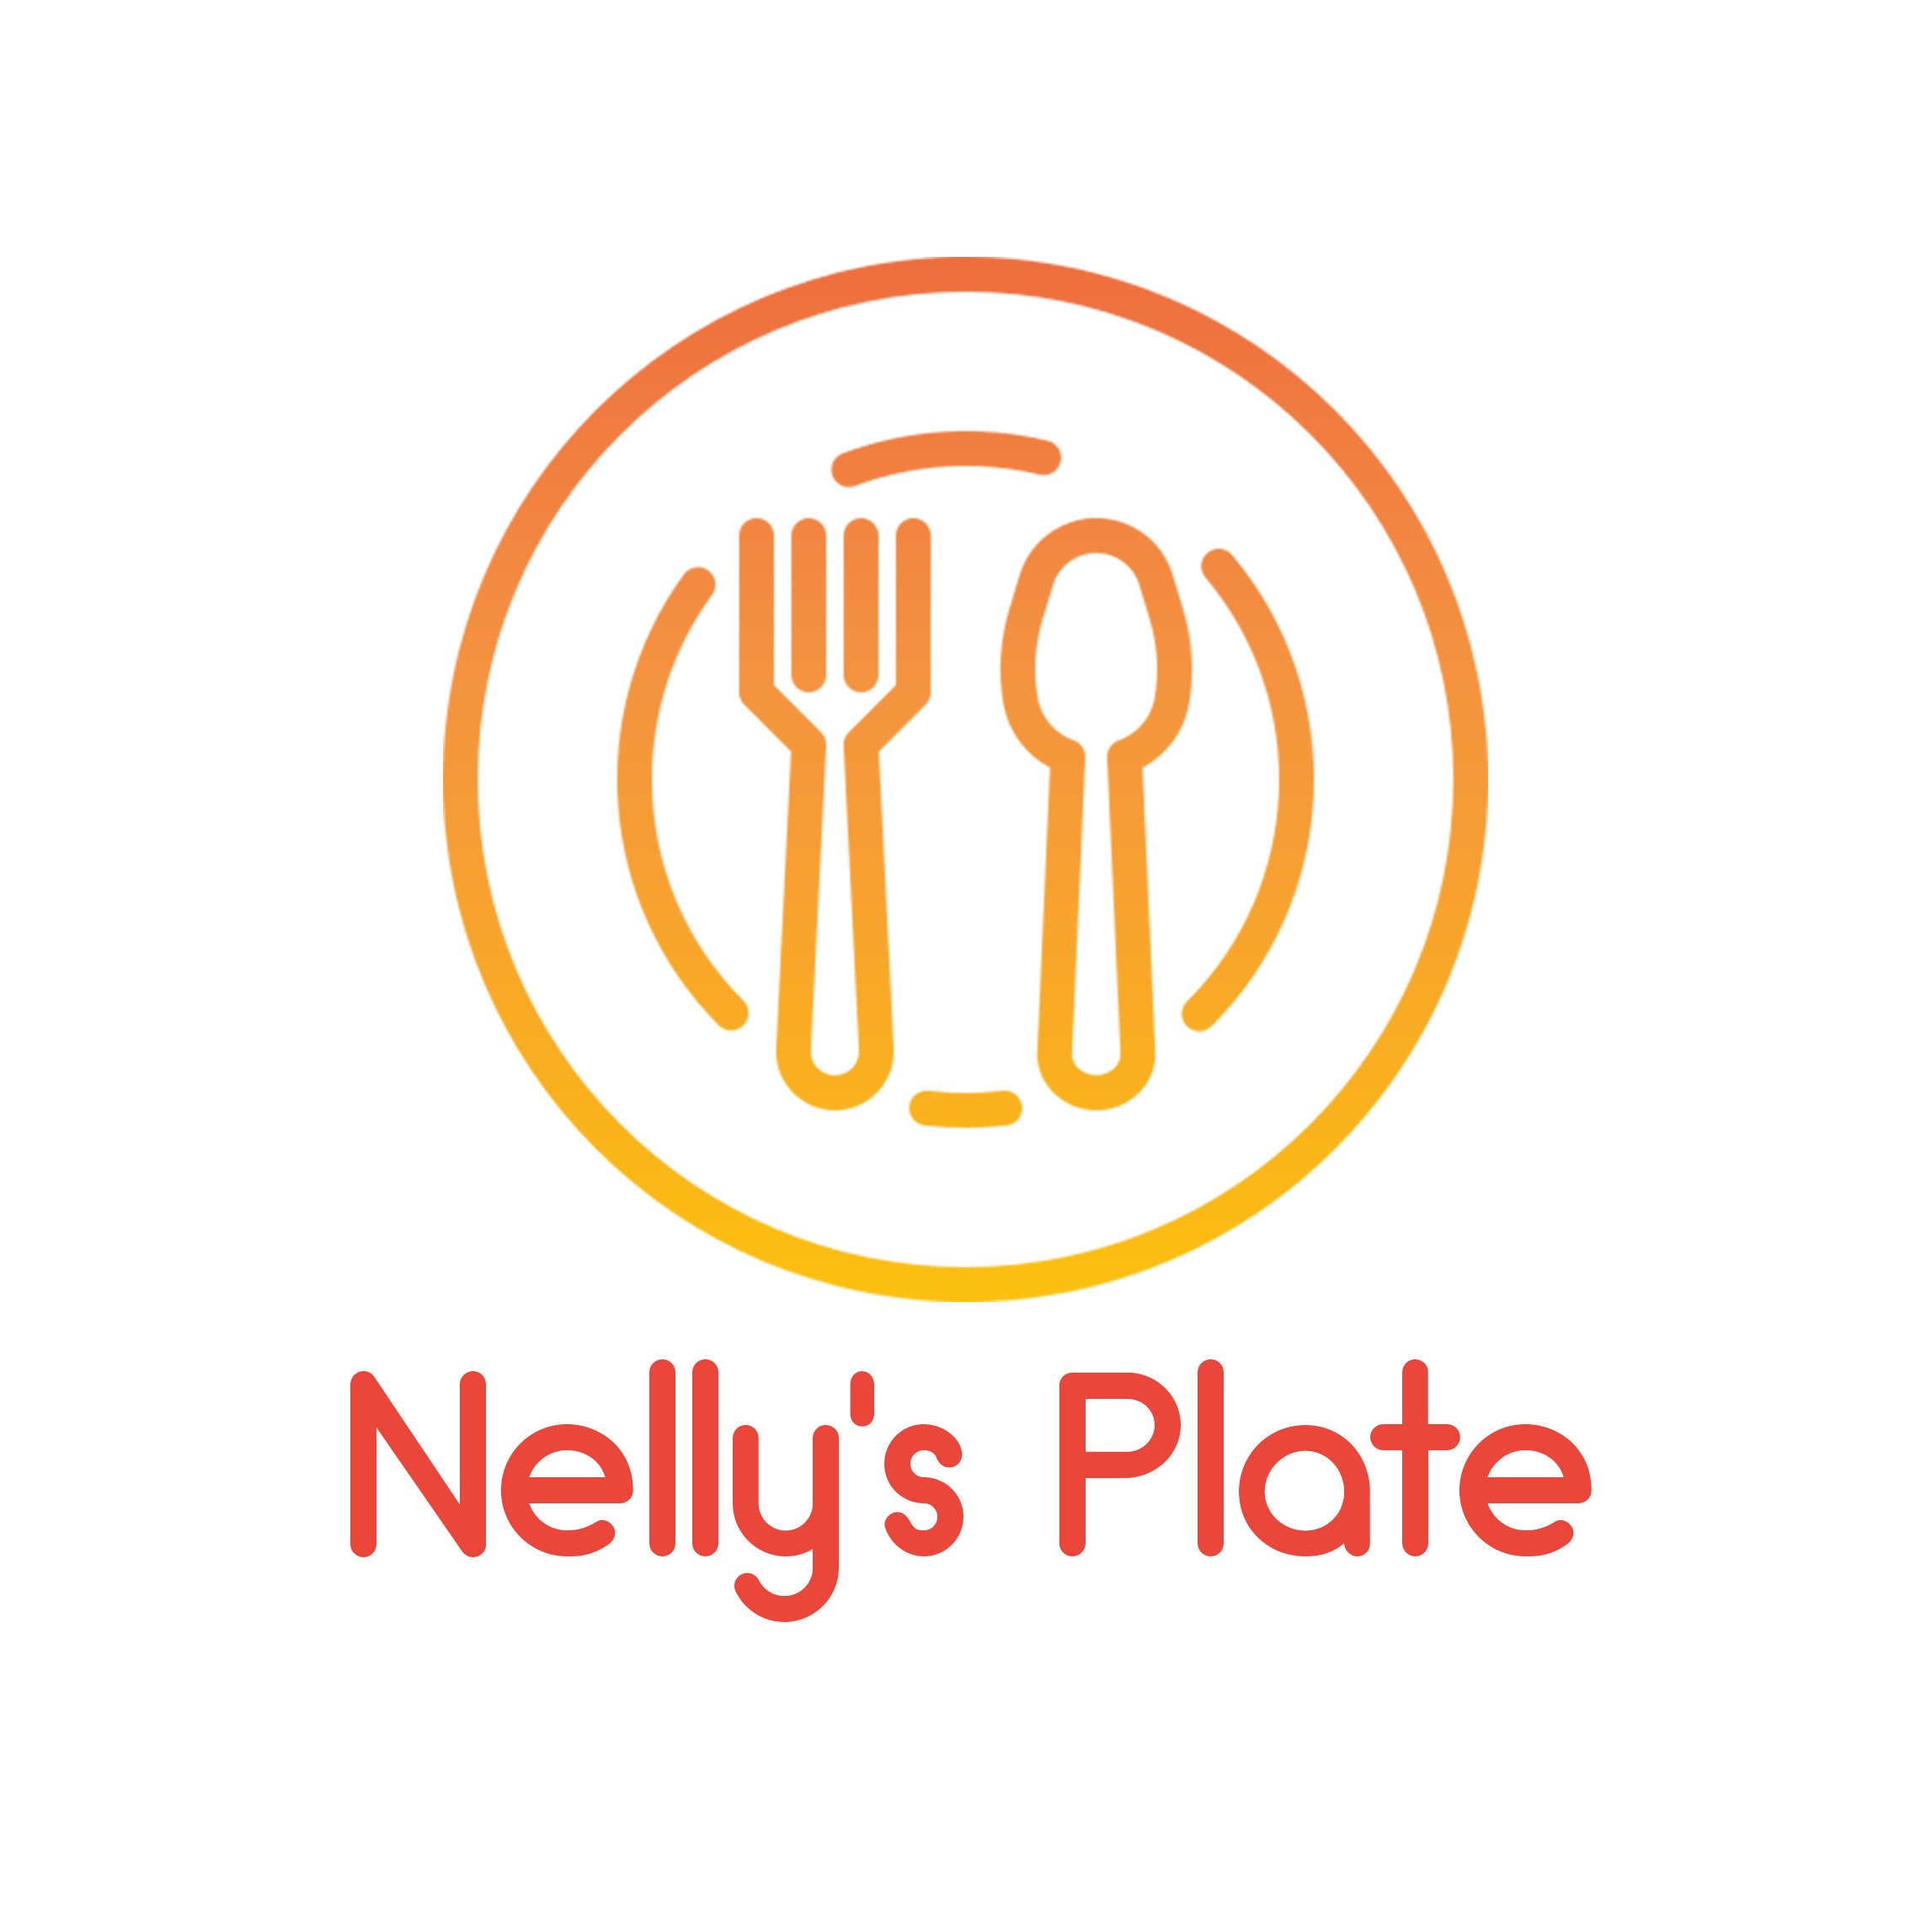 Nellys Plate